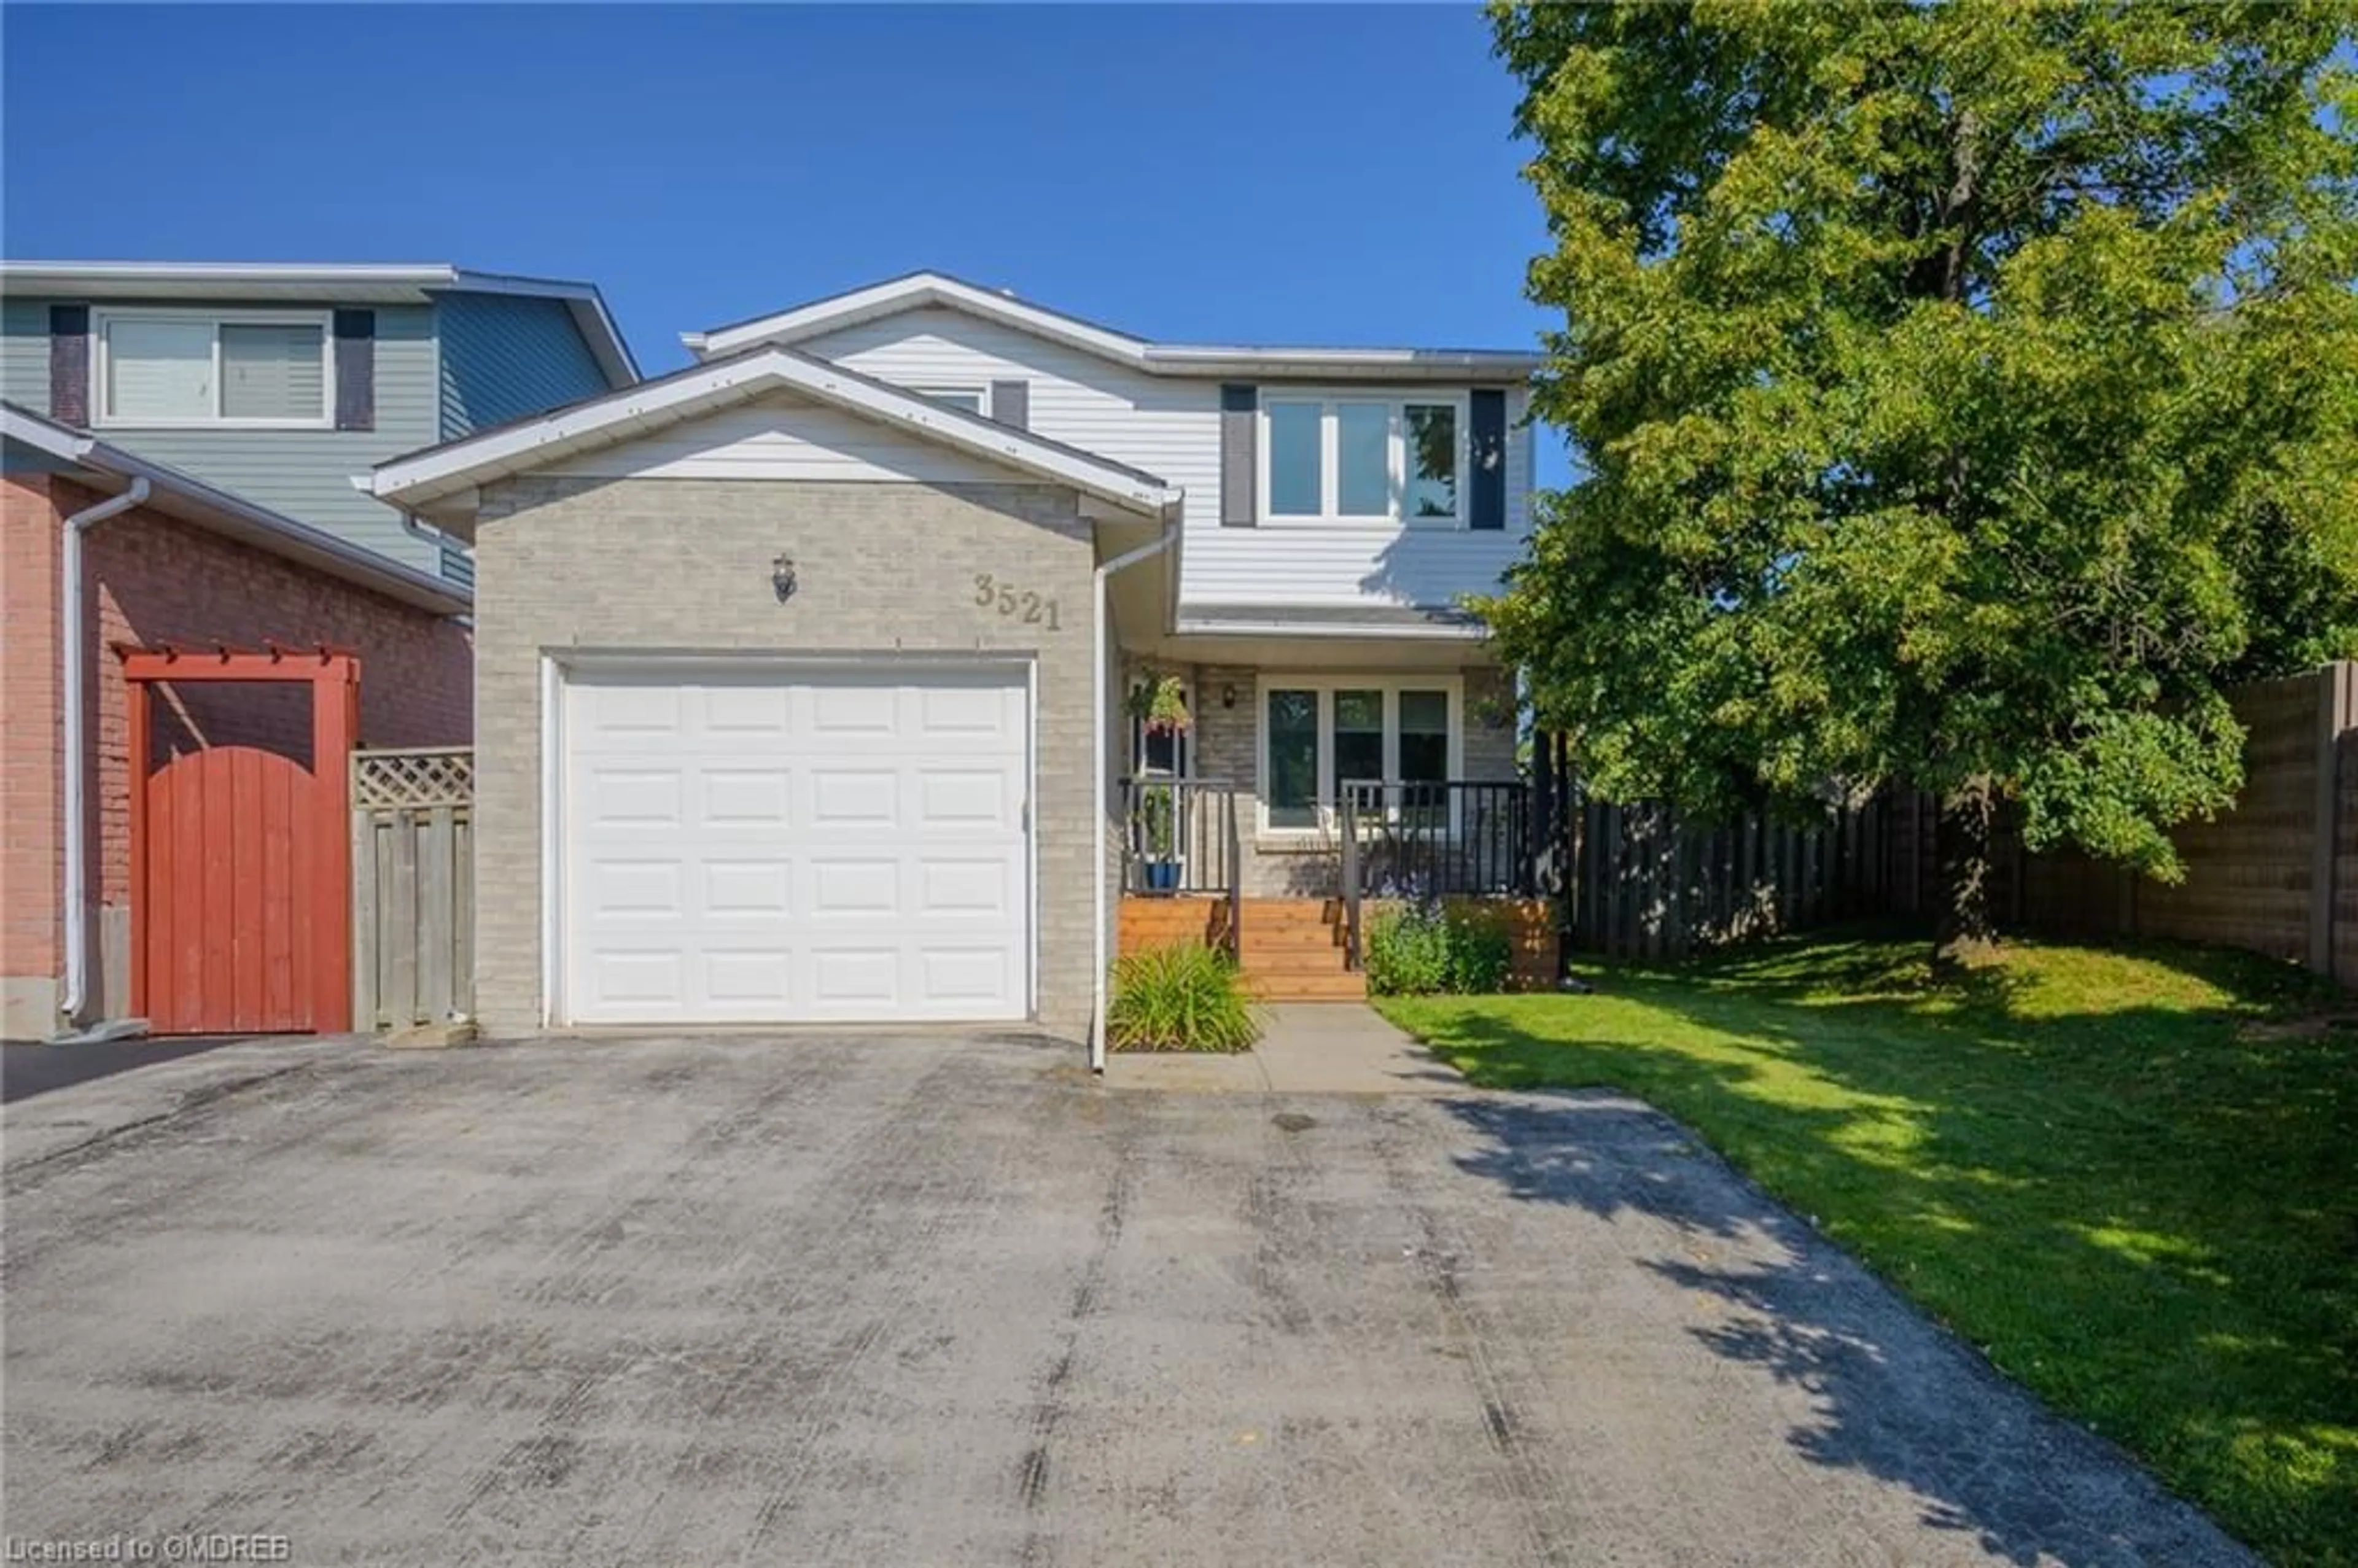 Frontside or backside of a home for 3521 Toffee St, Burlington Ontario L7M 3T6